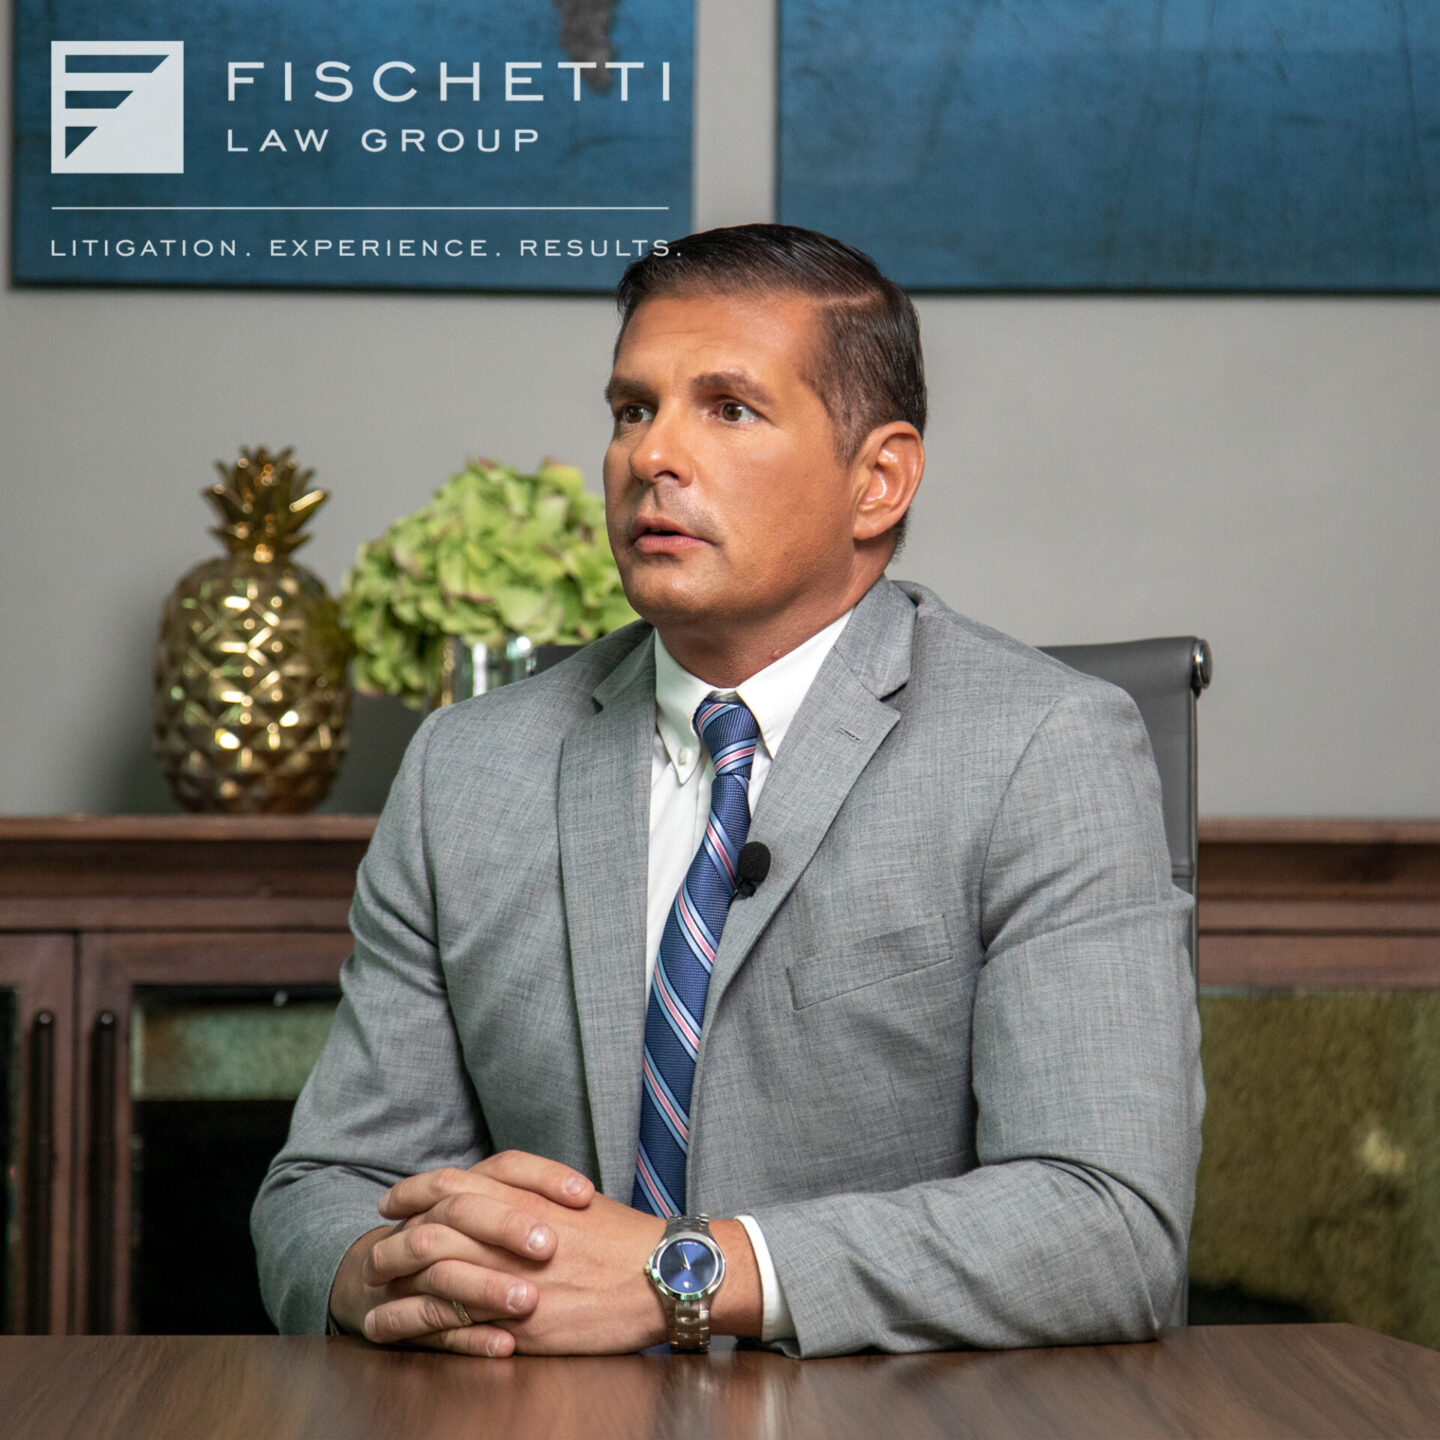 PIP Suits Lawyer Collections - PIP suits Hialeah - PIP suit lawyer in Florida